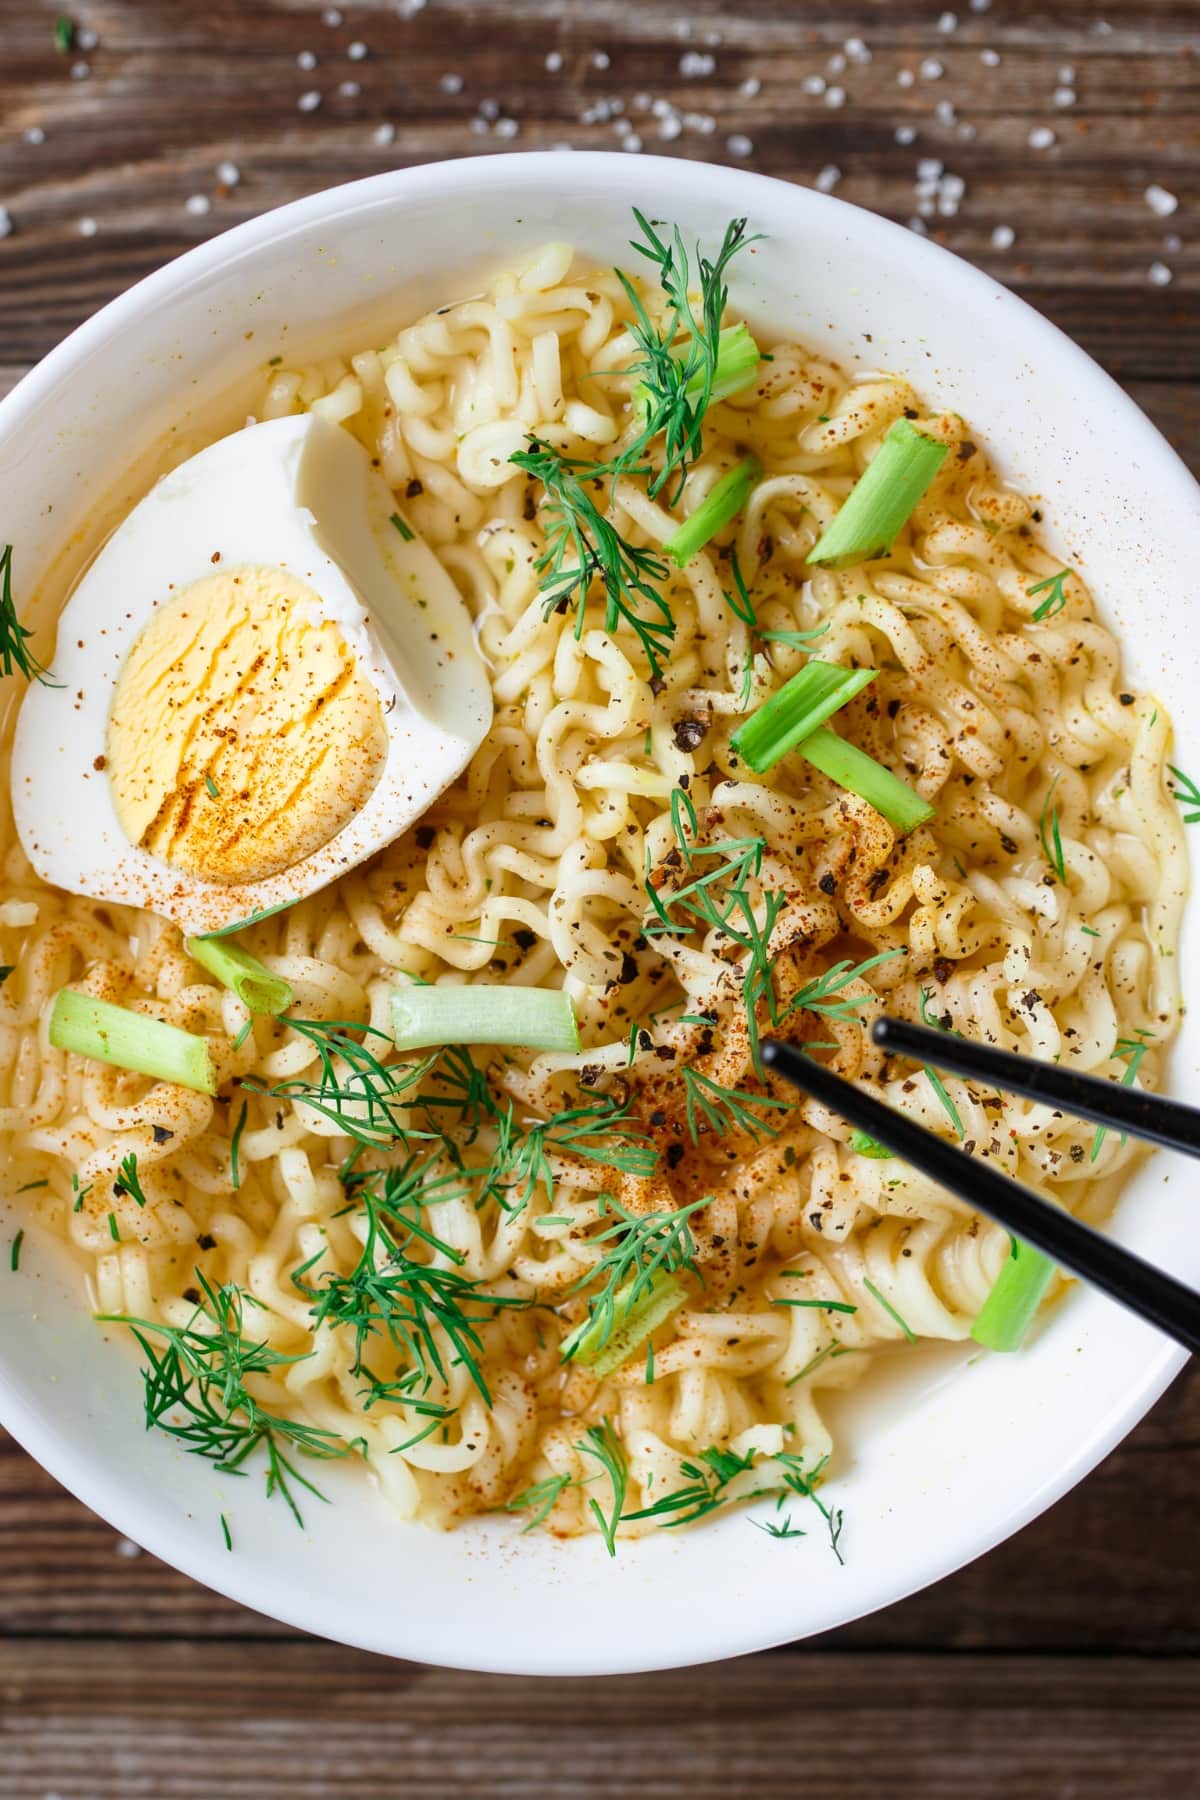 How to Cook Ramen Noodles in the Microwave featuring Bowl of Homemade Ramen Noodles with Hard-Boiled Egg, Chives, and 
Dill